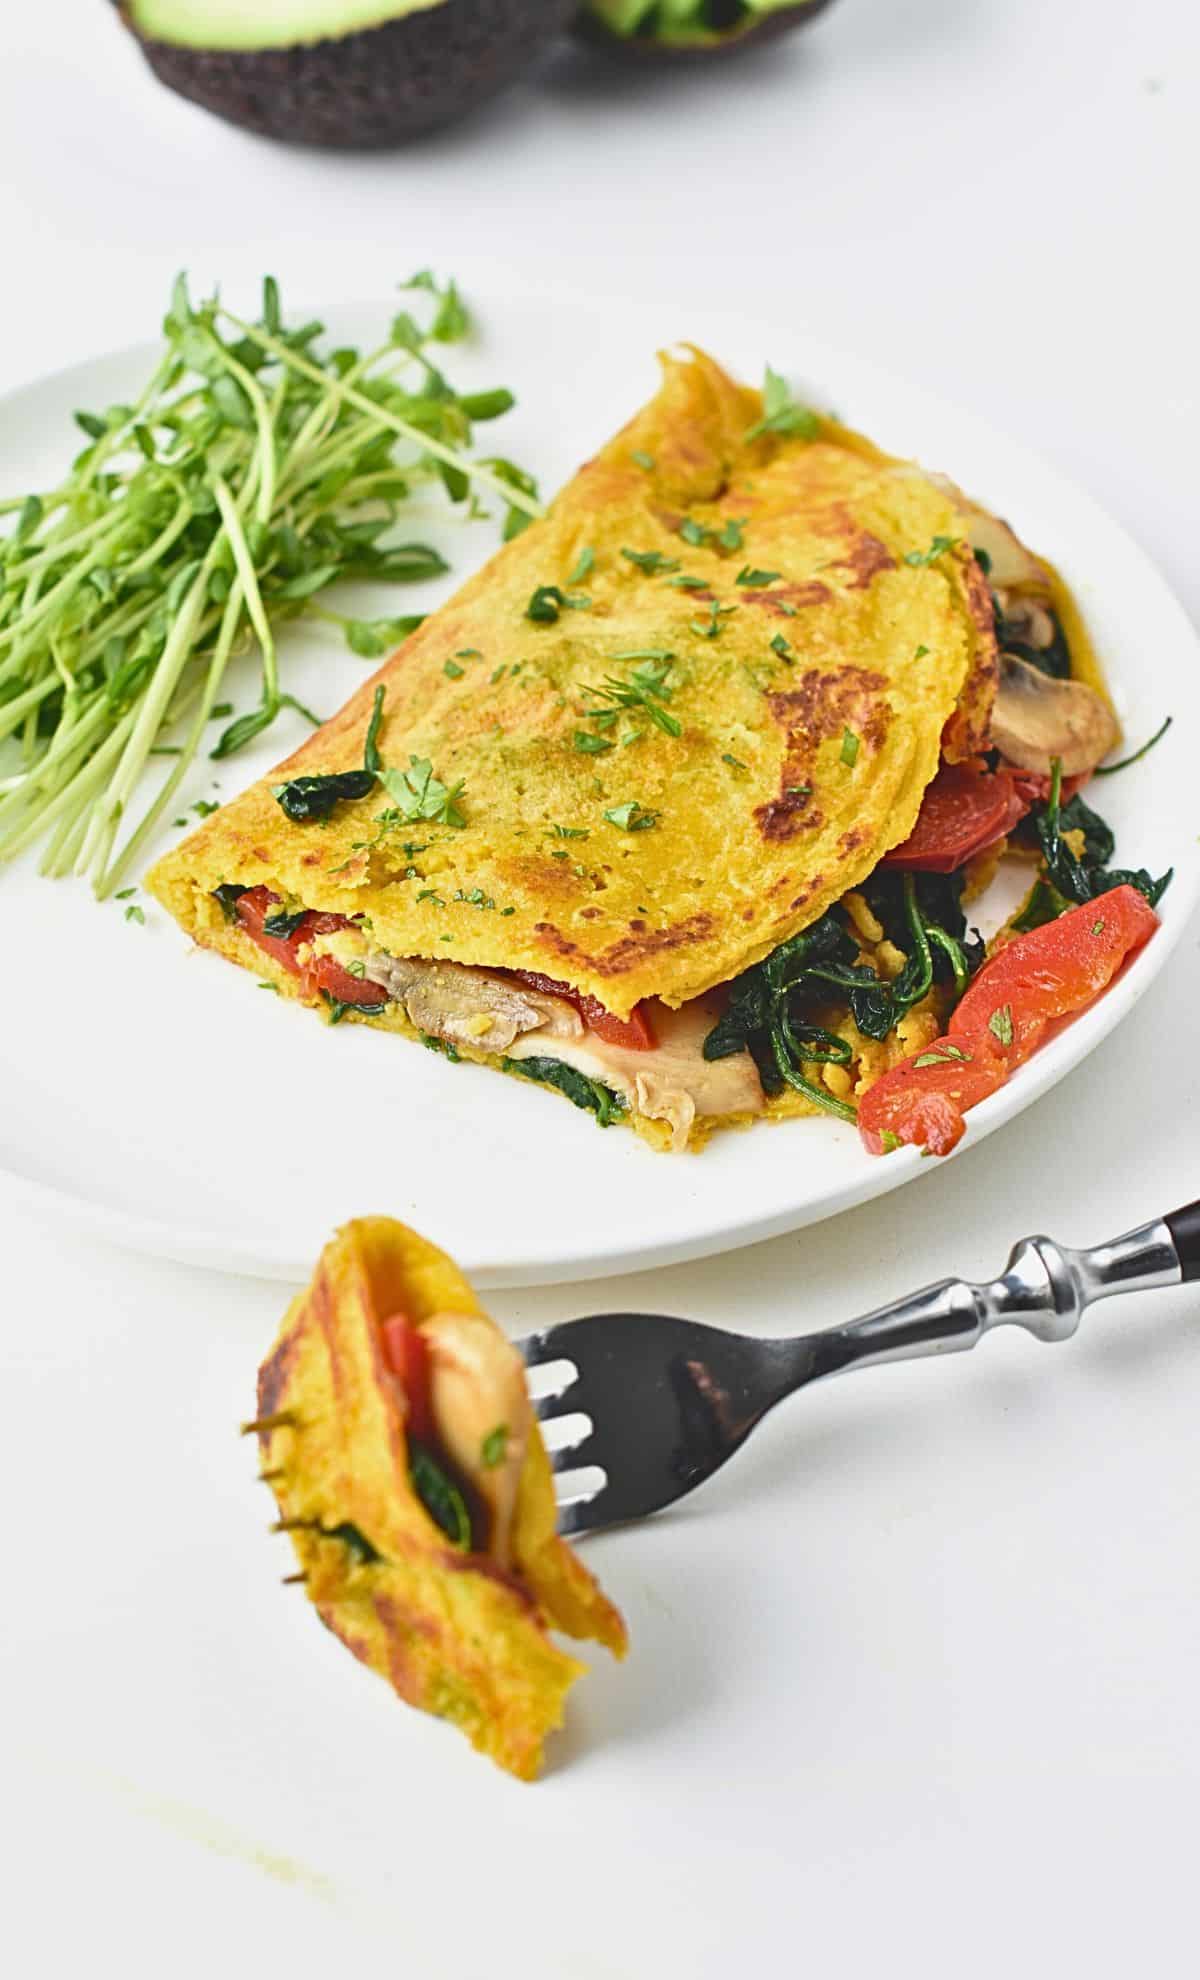 Chickpea flour omelette on a plate, filled with mushrooms, capsicum, and spinach.